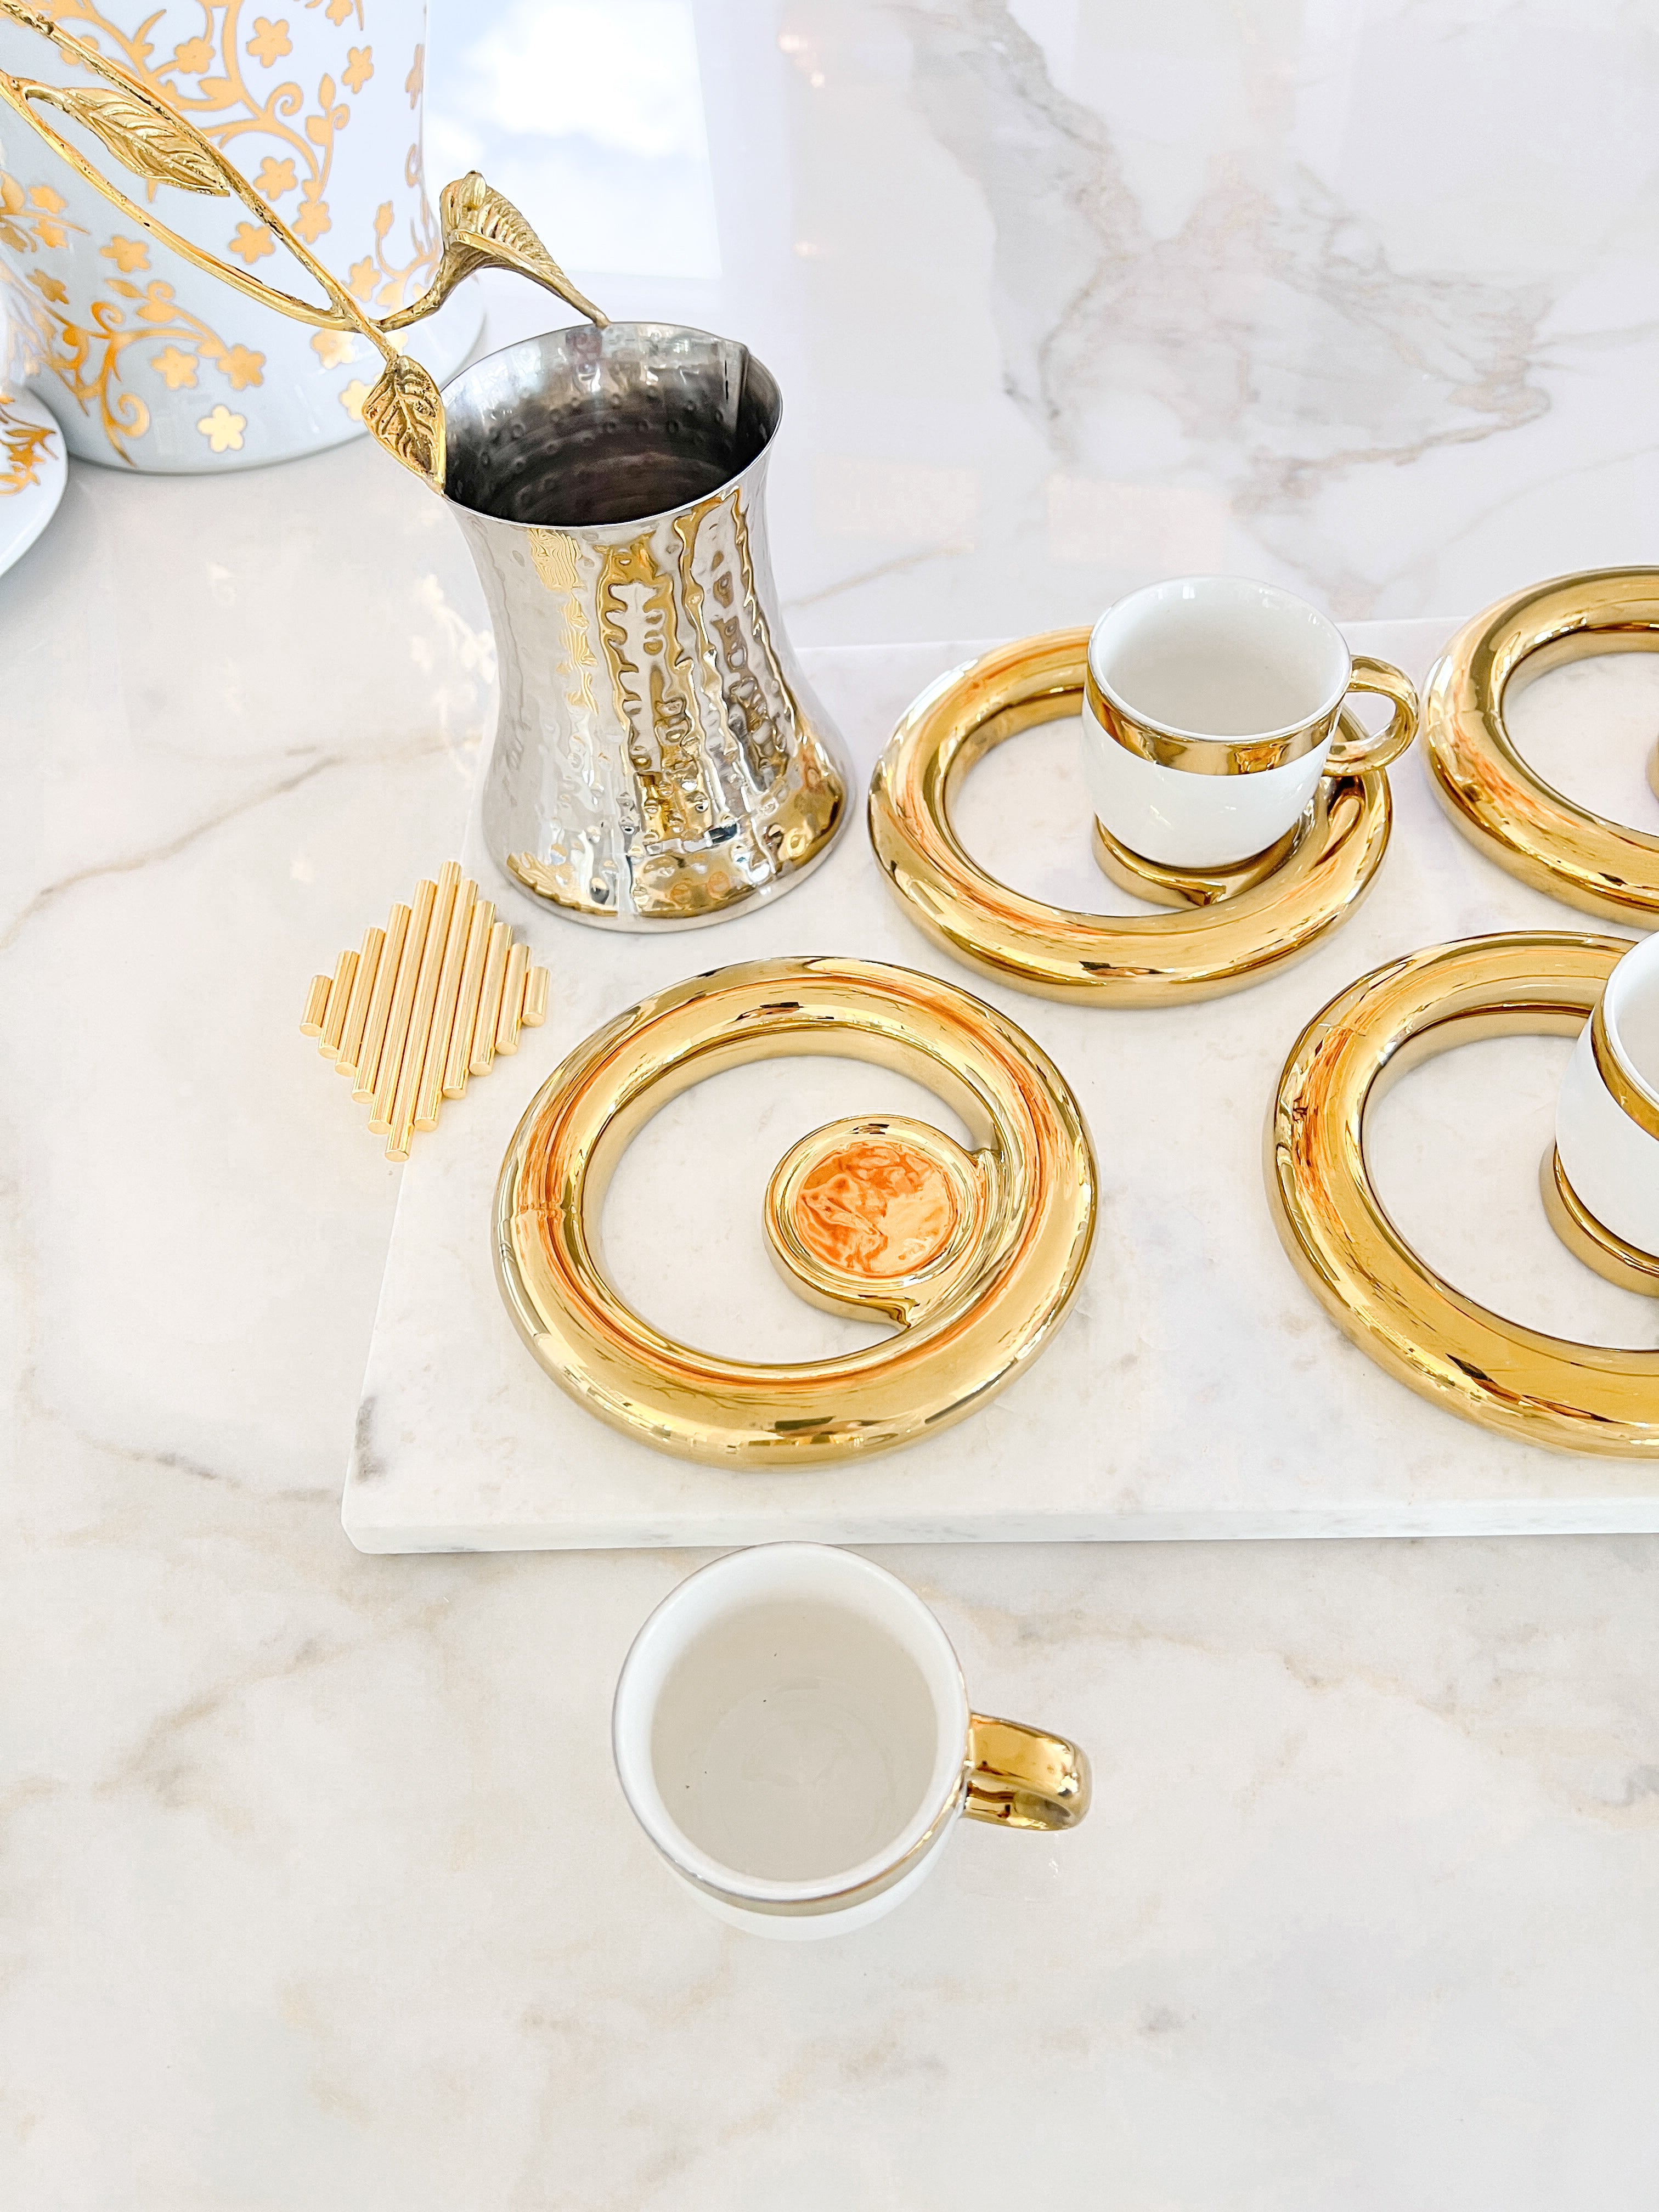 White Espresso Coffee Cups with Gold Hallow Saucer